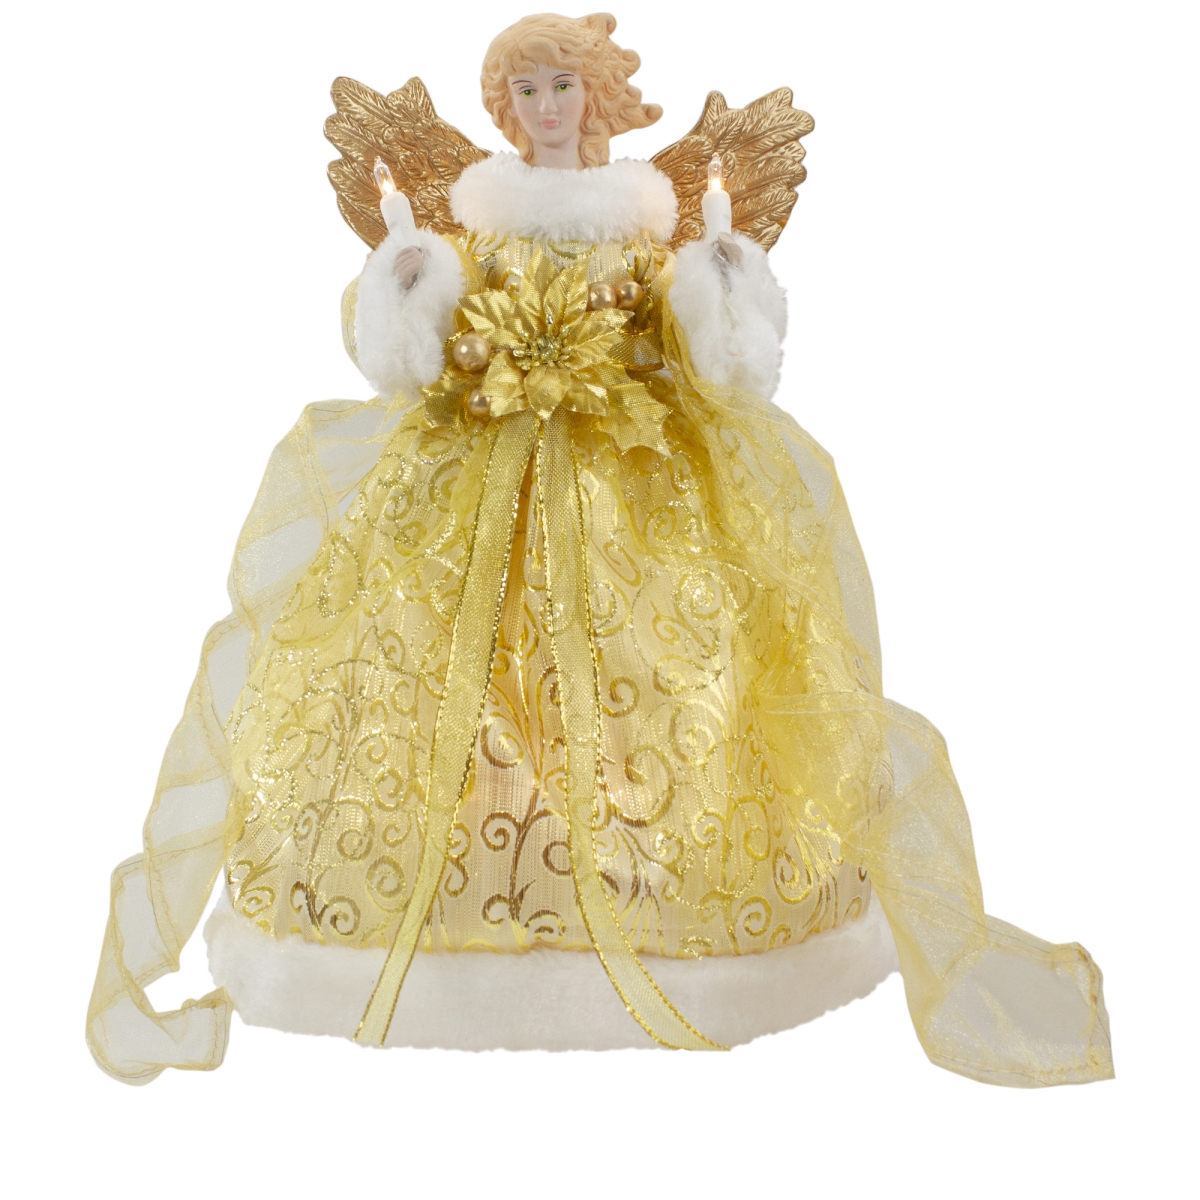 Picture of Northlight 34850967 12 in. Lighted Angel with Wings Christmas Tree Topper, Gold - Clear Lights